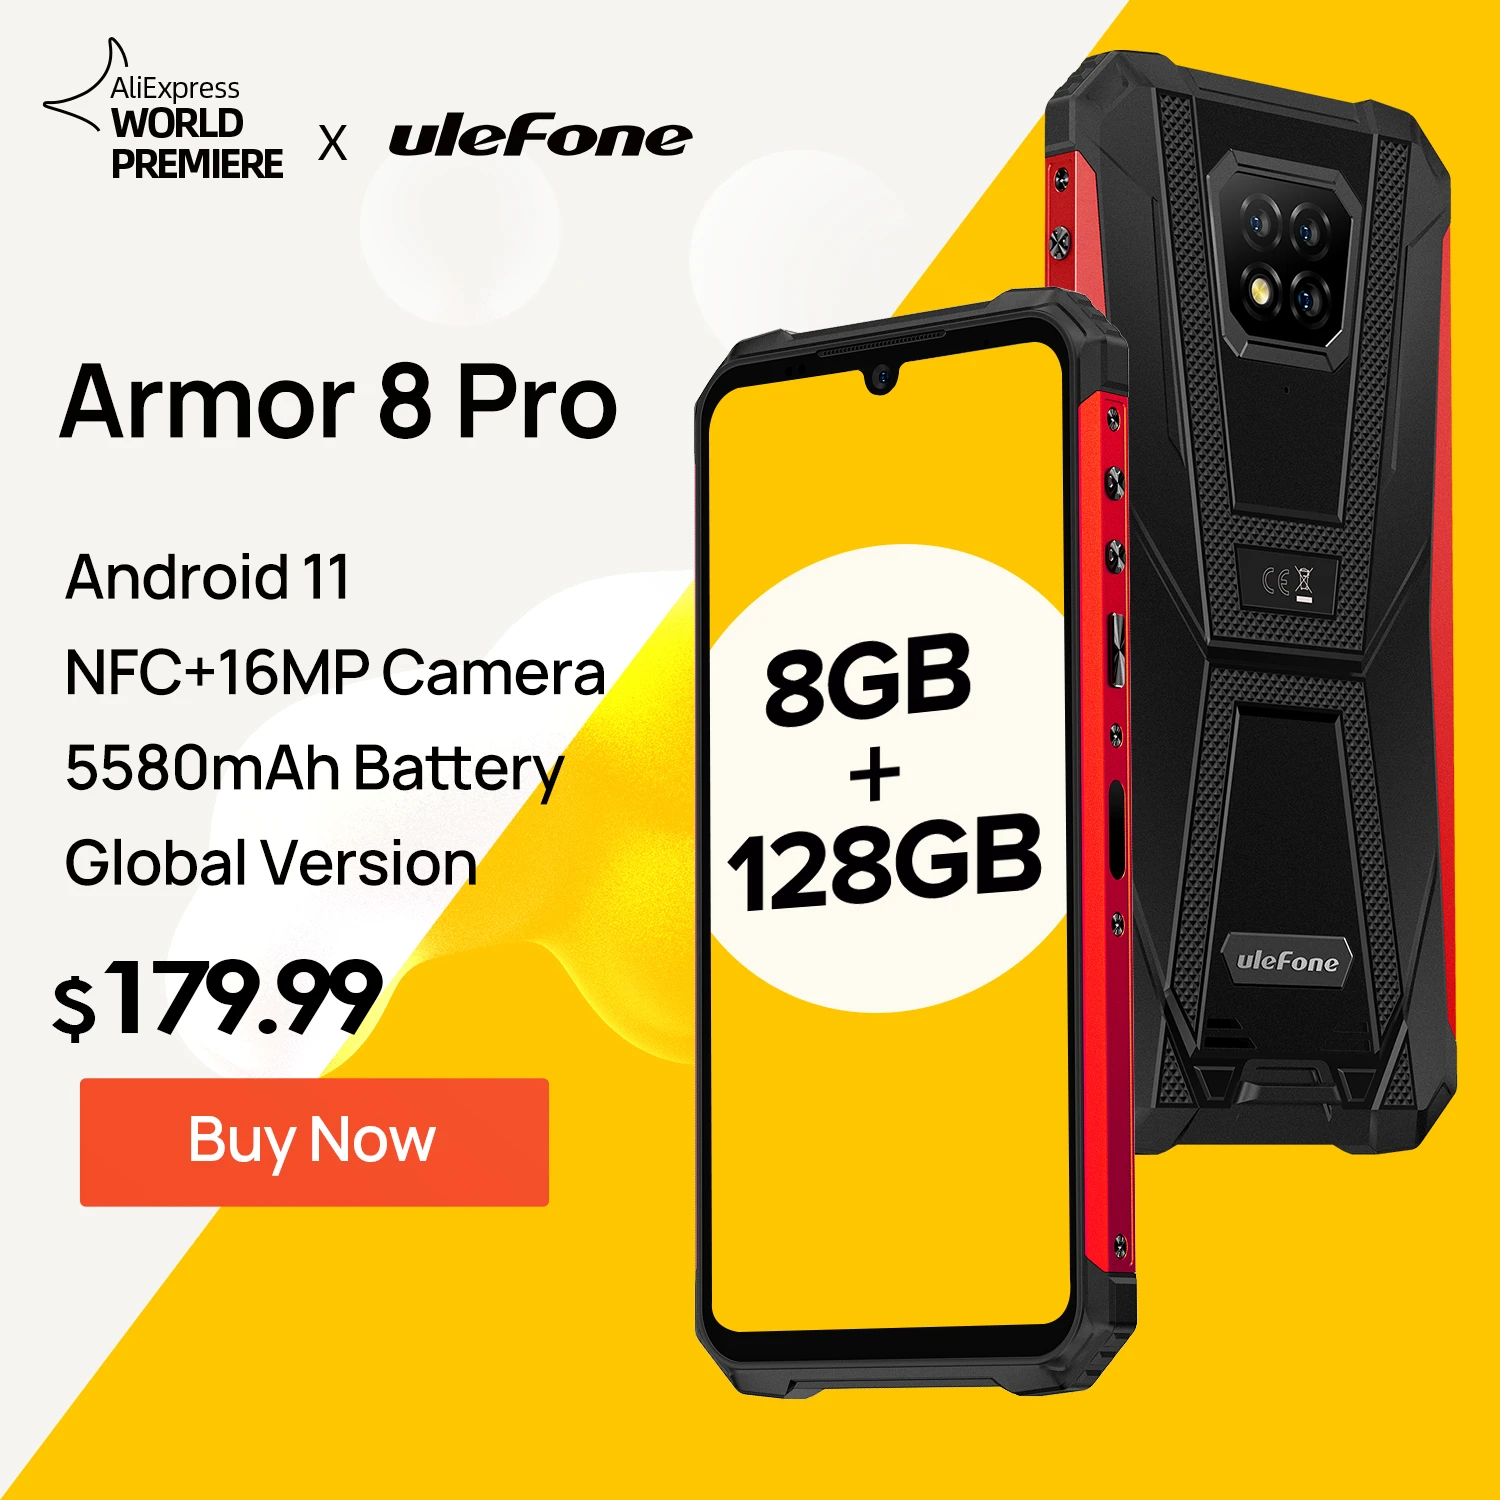 ddr5 ram Ulefone Armor 8 Pro 8GB+128GB  Rugged Smartphone Android 11 NFC/IP68/ Smartphone 5580mAh Waterproof Mobile Phone Global version 8gb ddr4